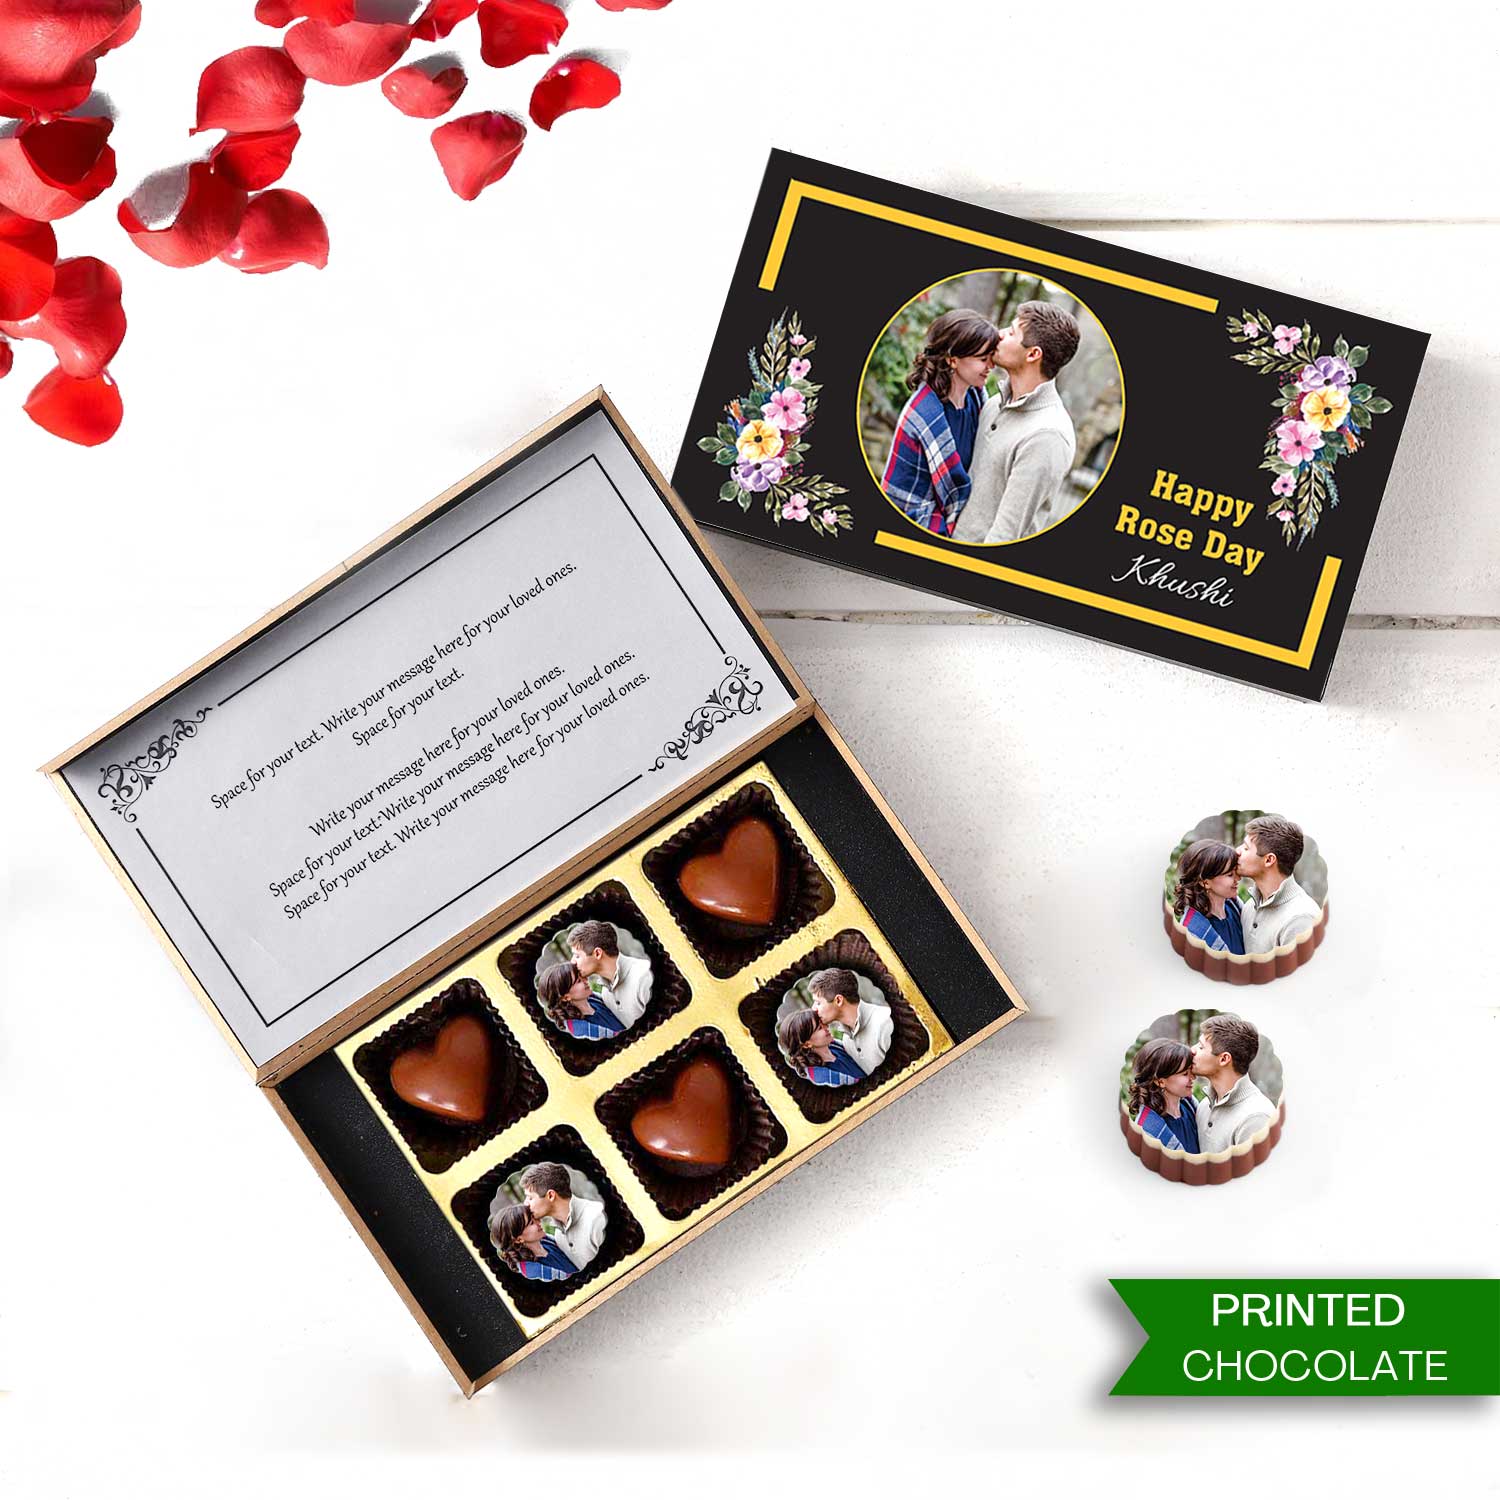 Personalized Rose Day chocolate gift with photo/name printed